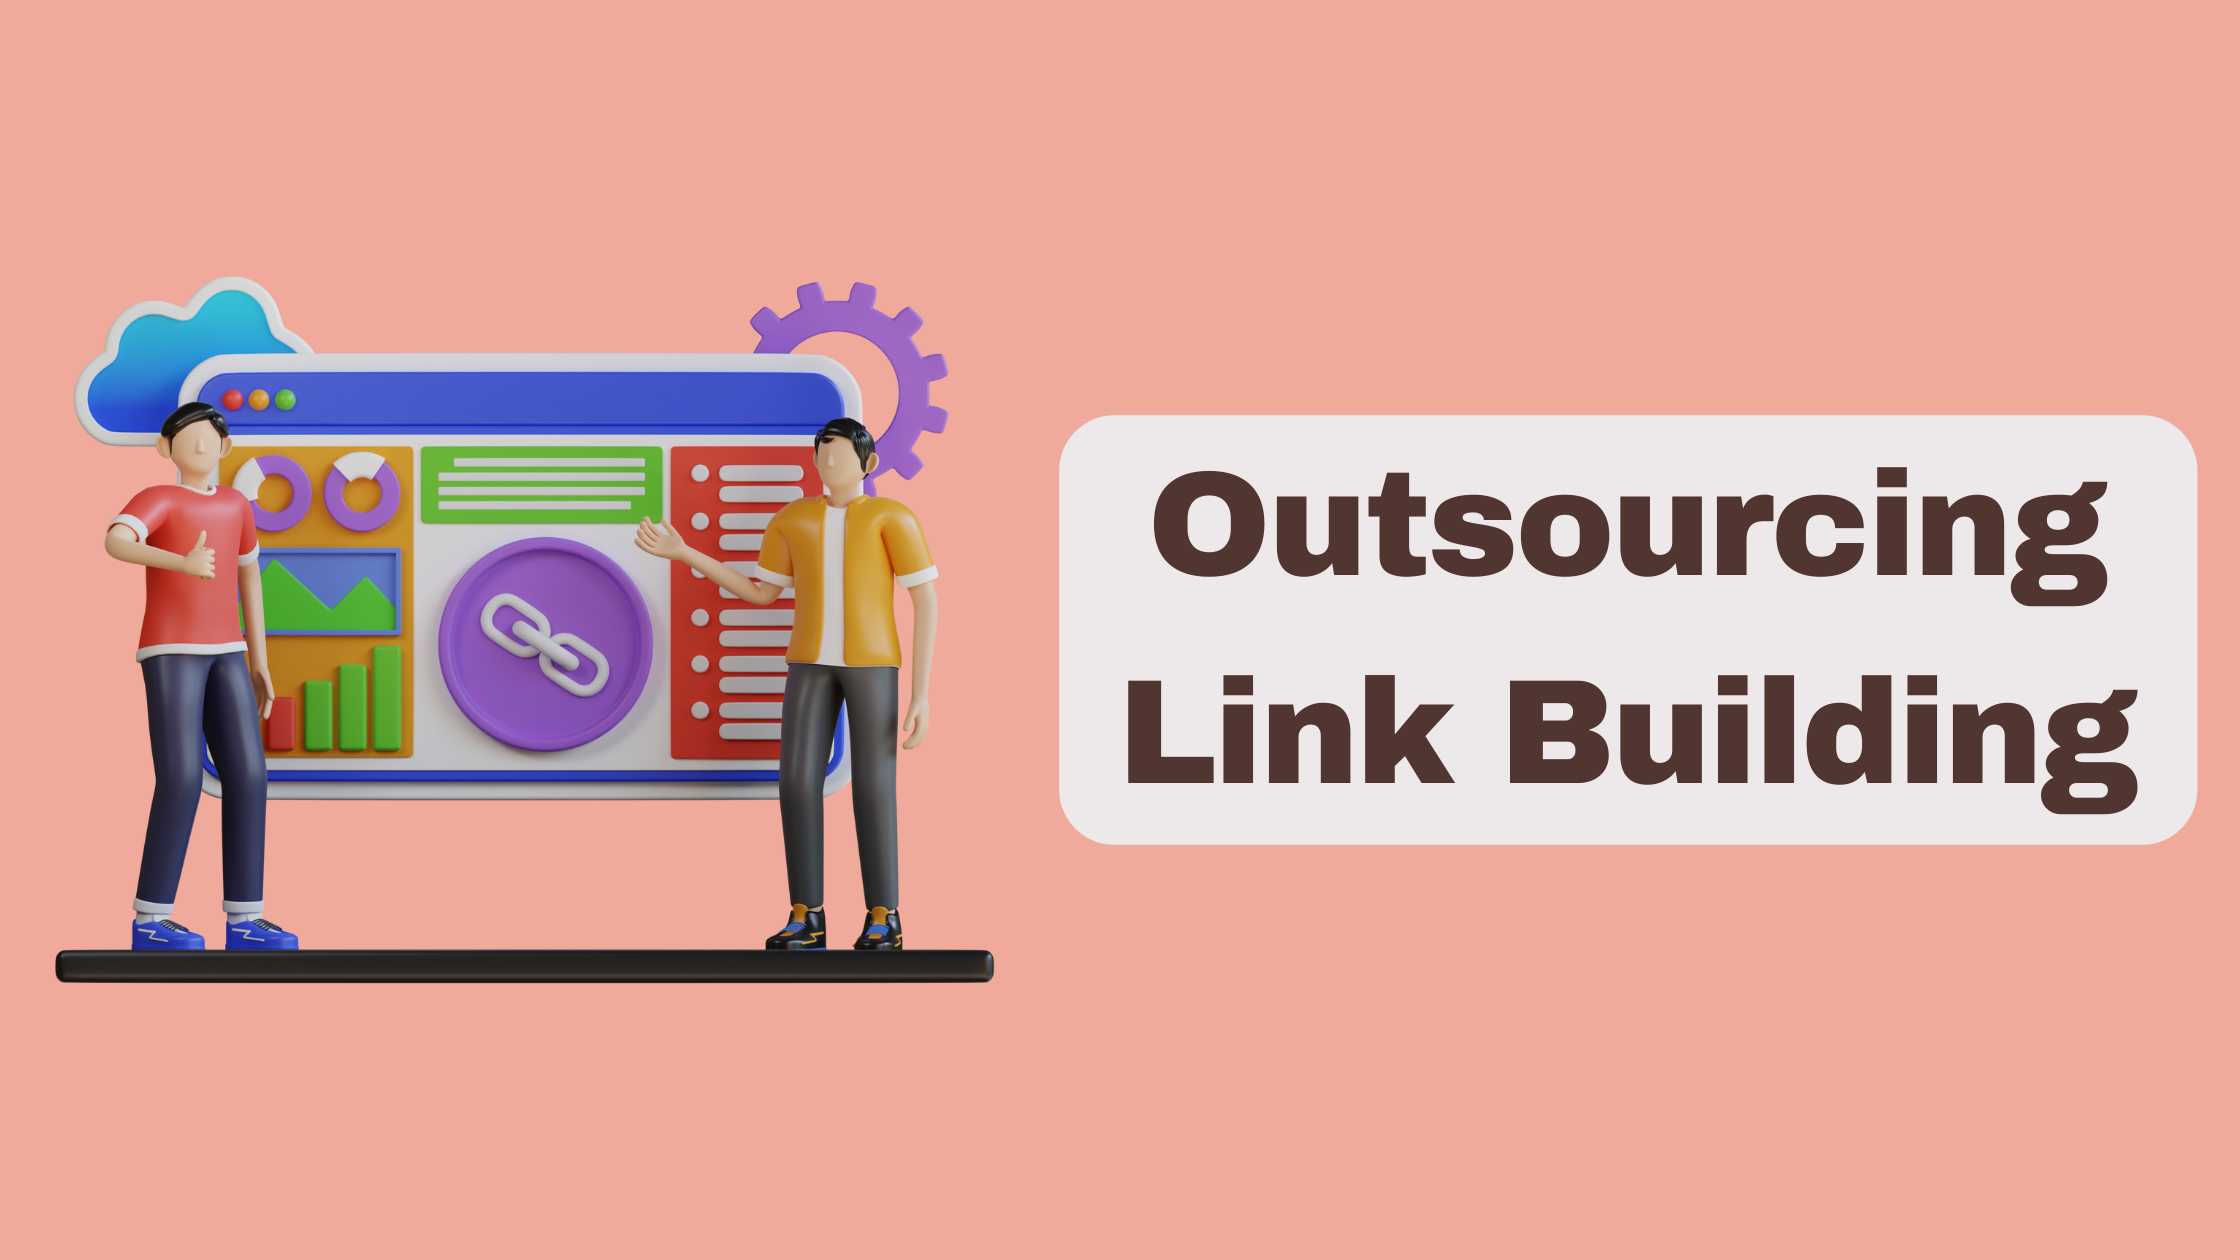 Outsourcing Link Building